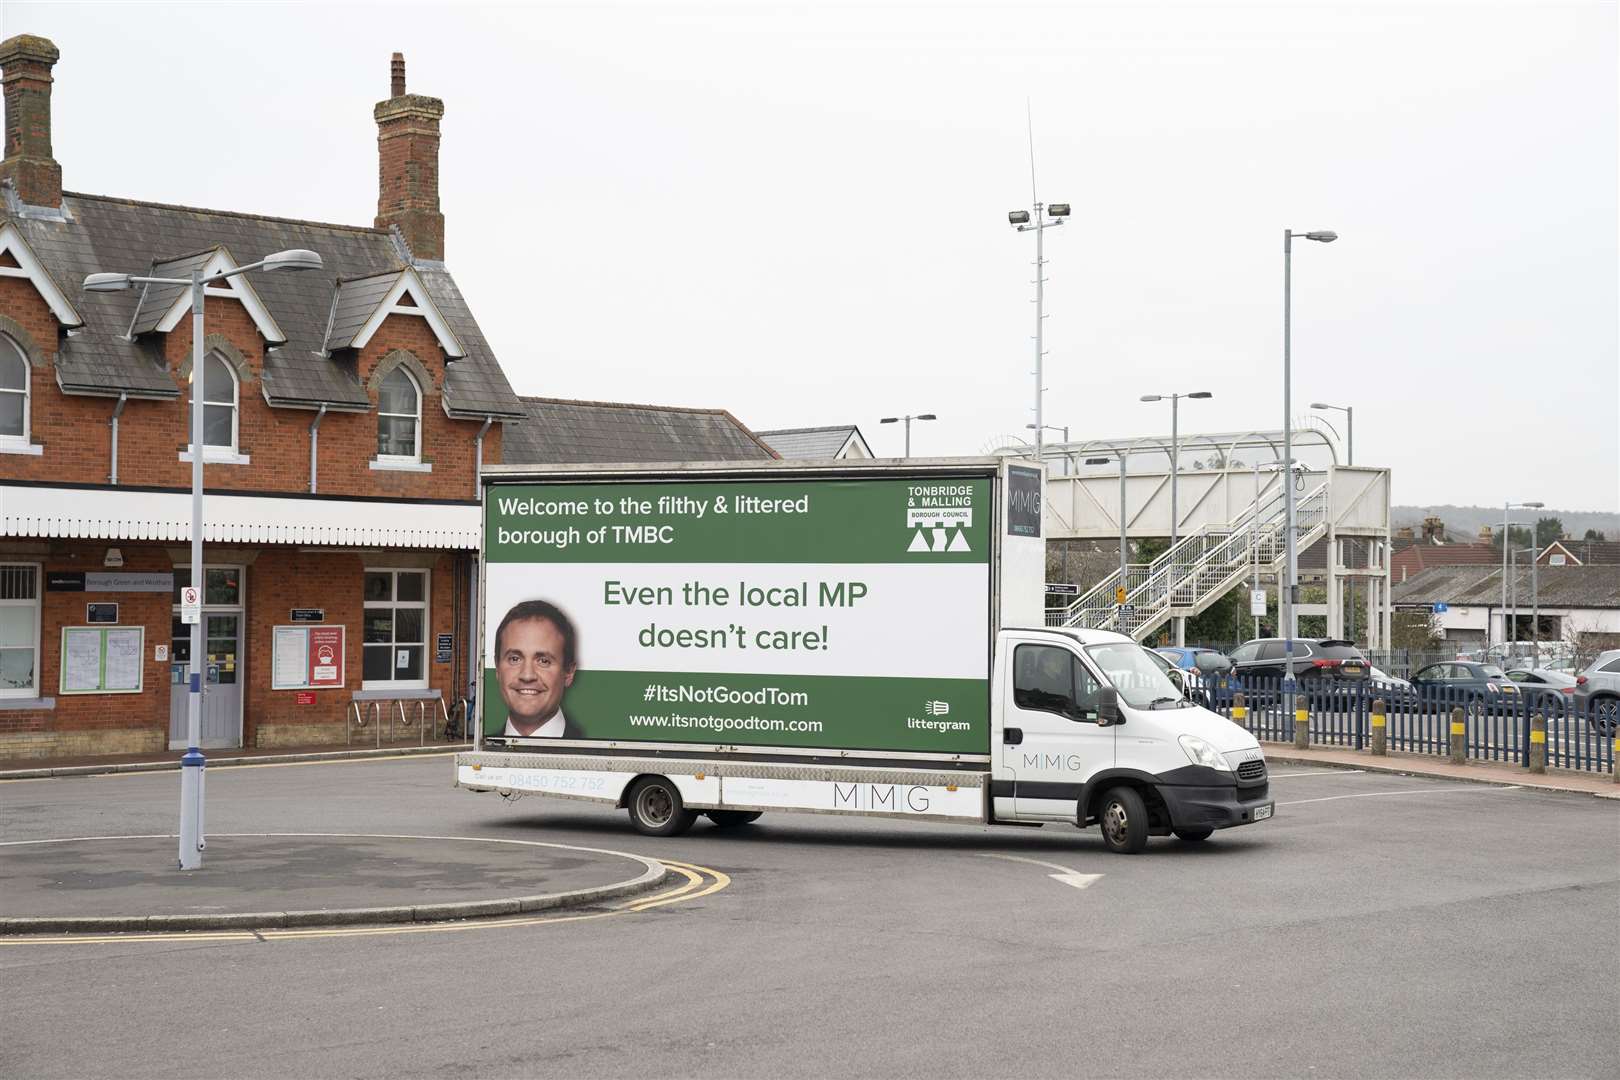 Danny Lucas's mobile billboard arrives at Wrotham and Borough Green station campaigning against litter in Tonbridge and Malling